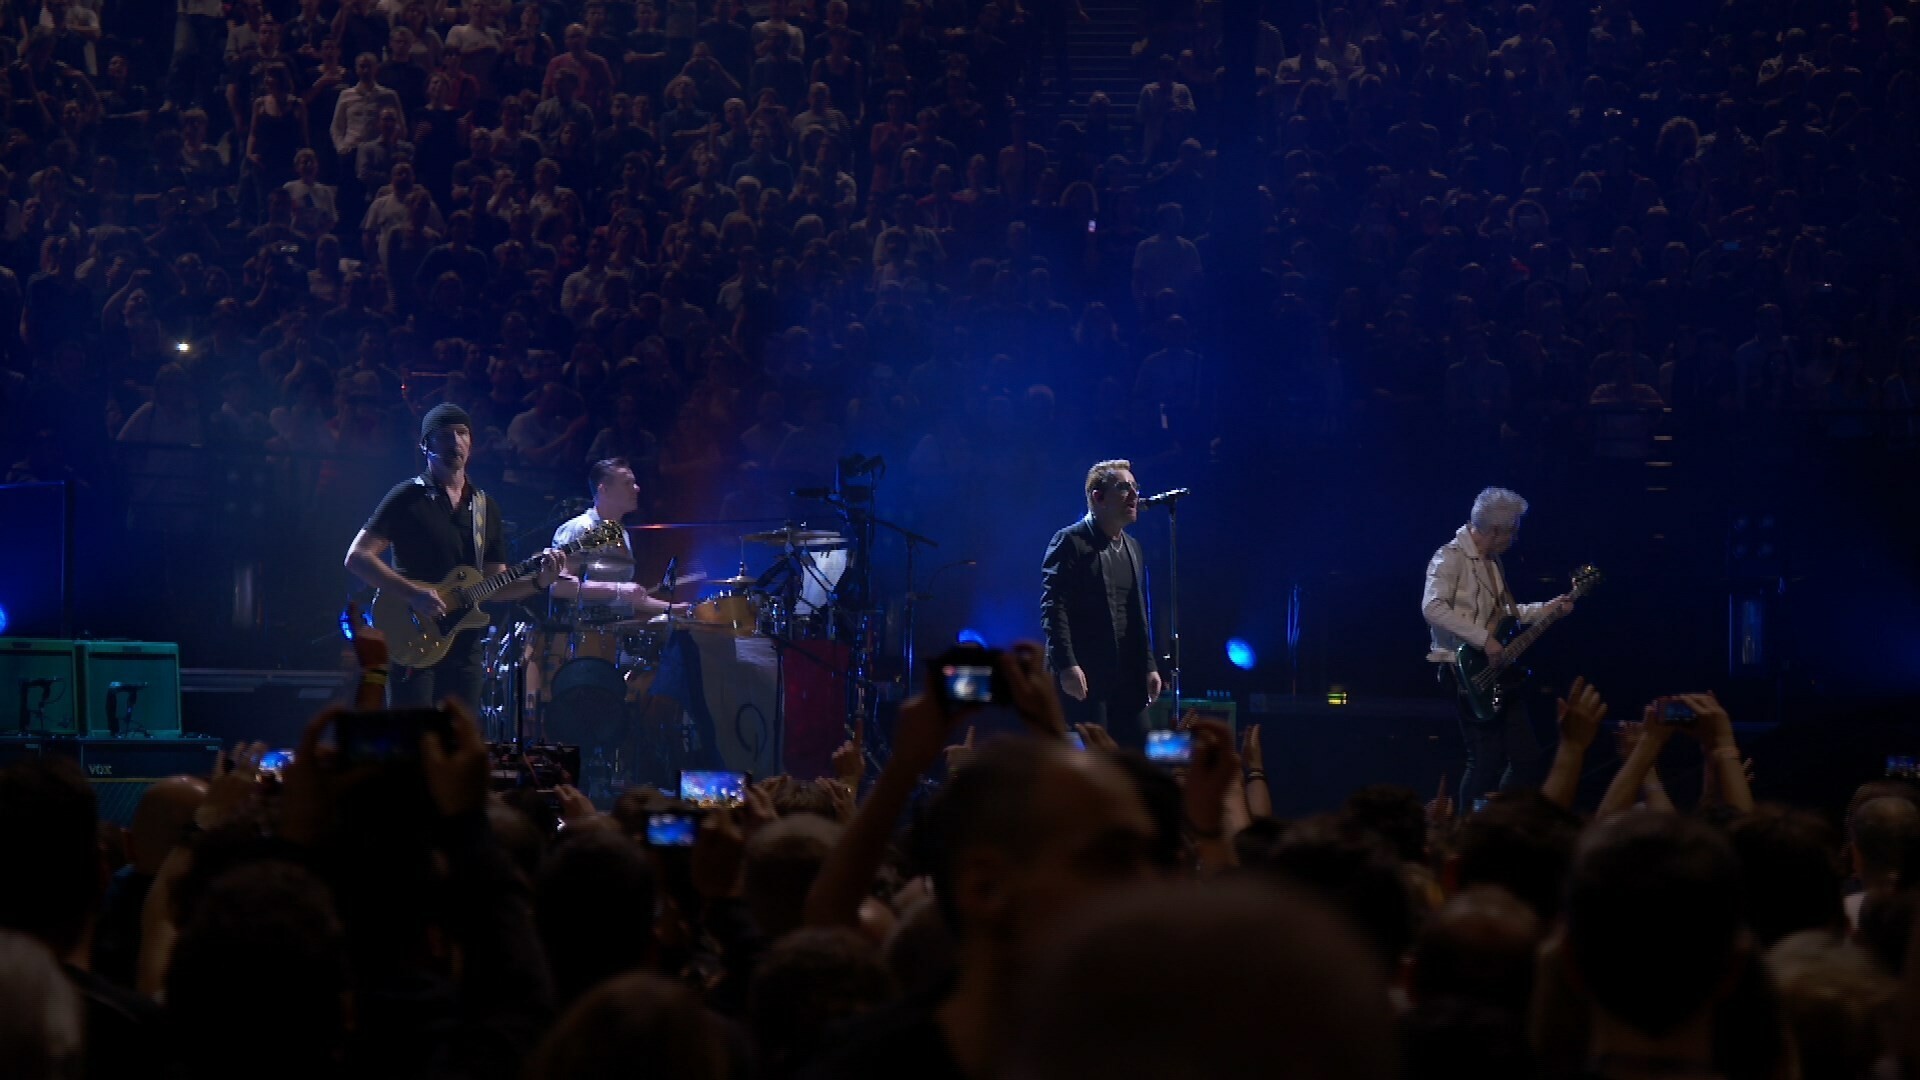 U2: Innocence + Experience, A worldwide concert tour by the band. 1920x1080 Full HD Wallpaper.